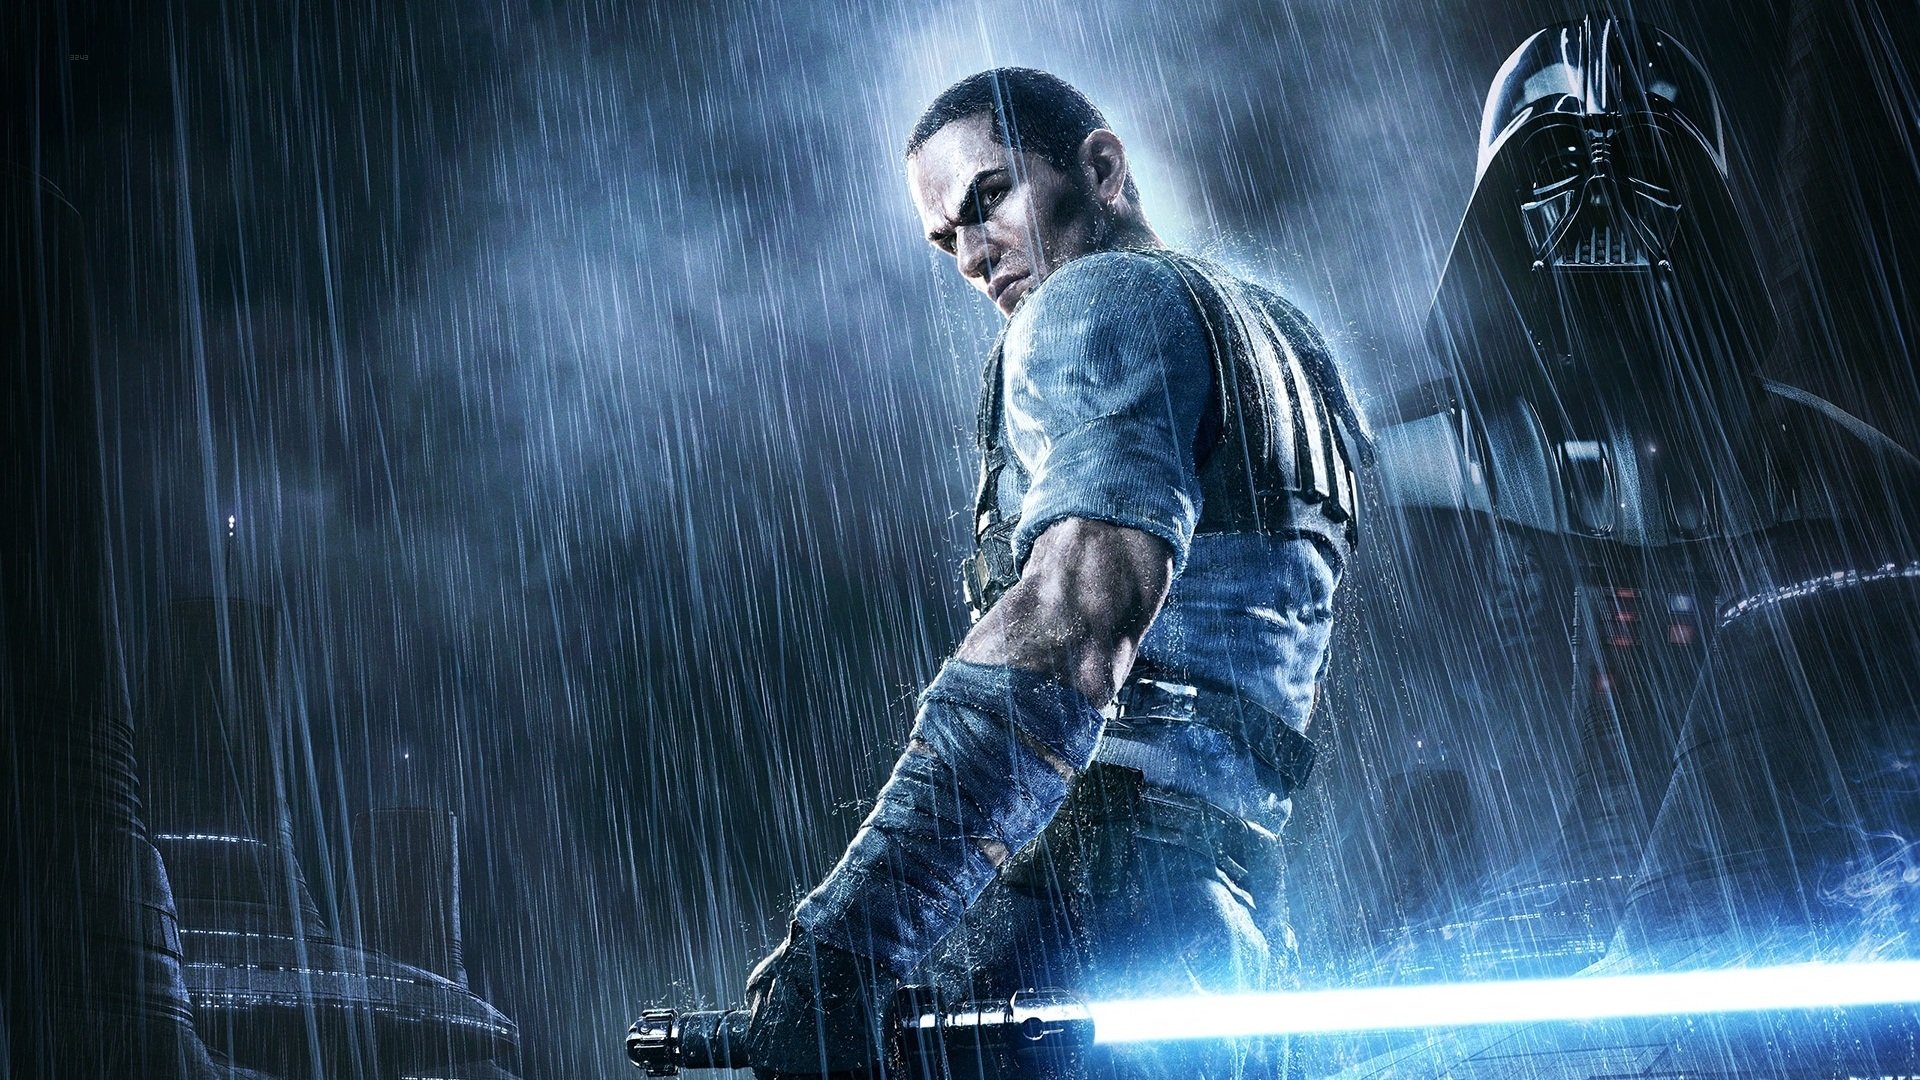 Star Wars The Force Unleashed 2 1080p Wallpaper 1920x1080